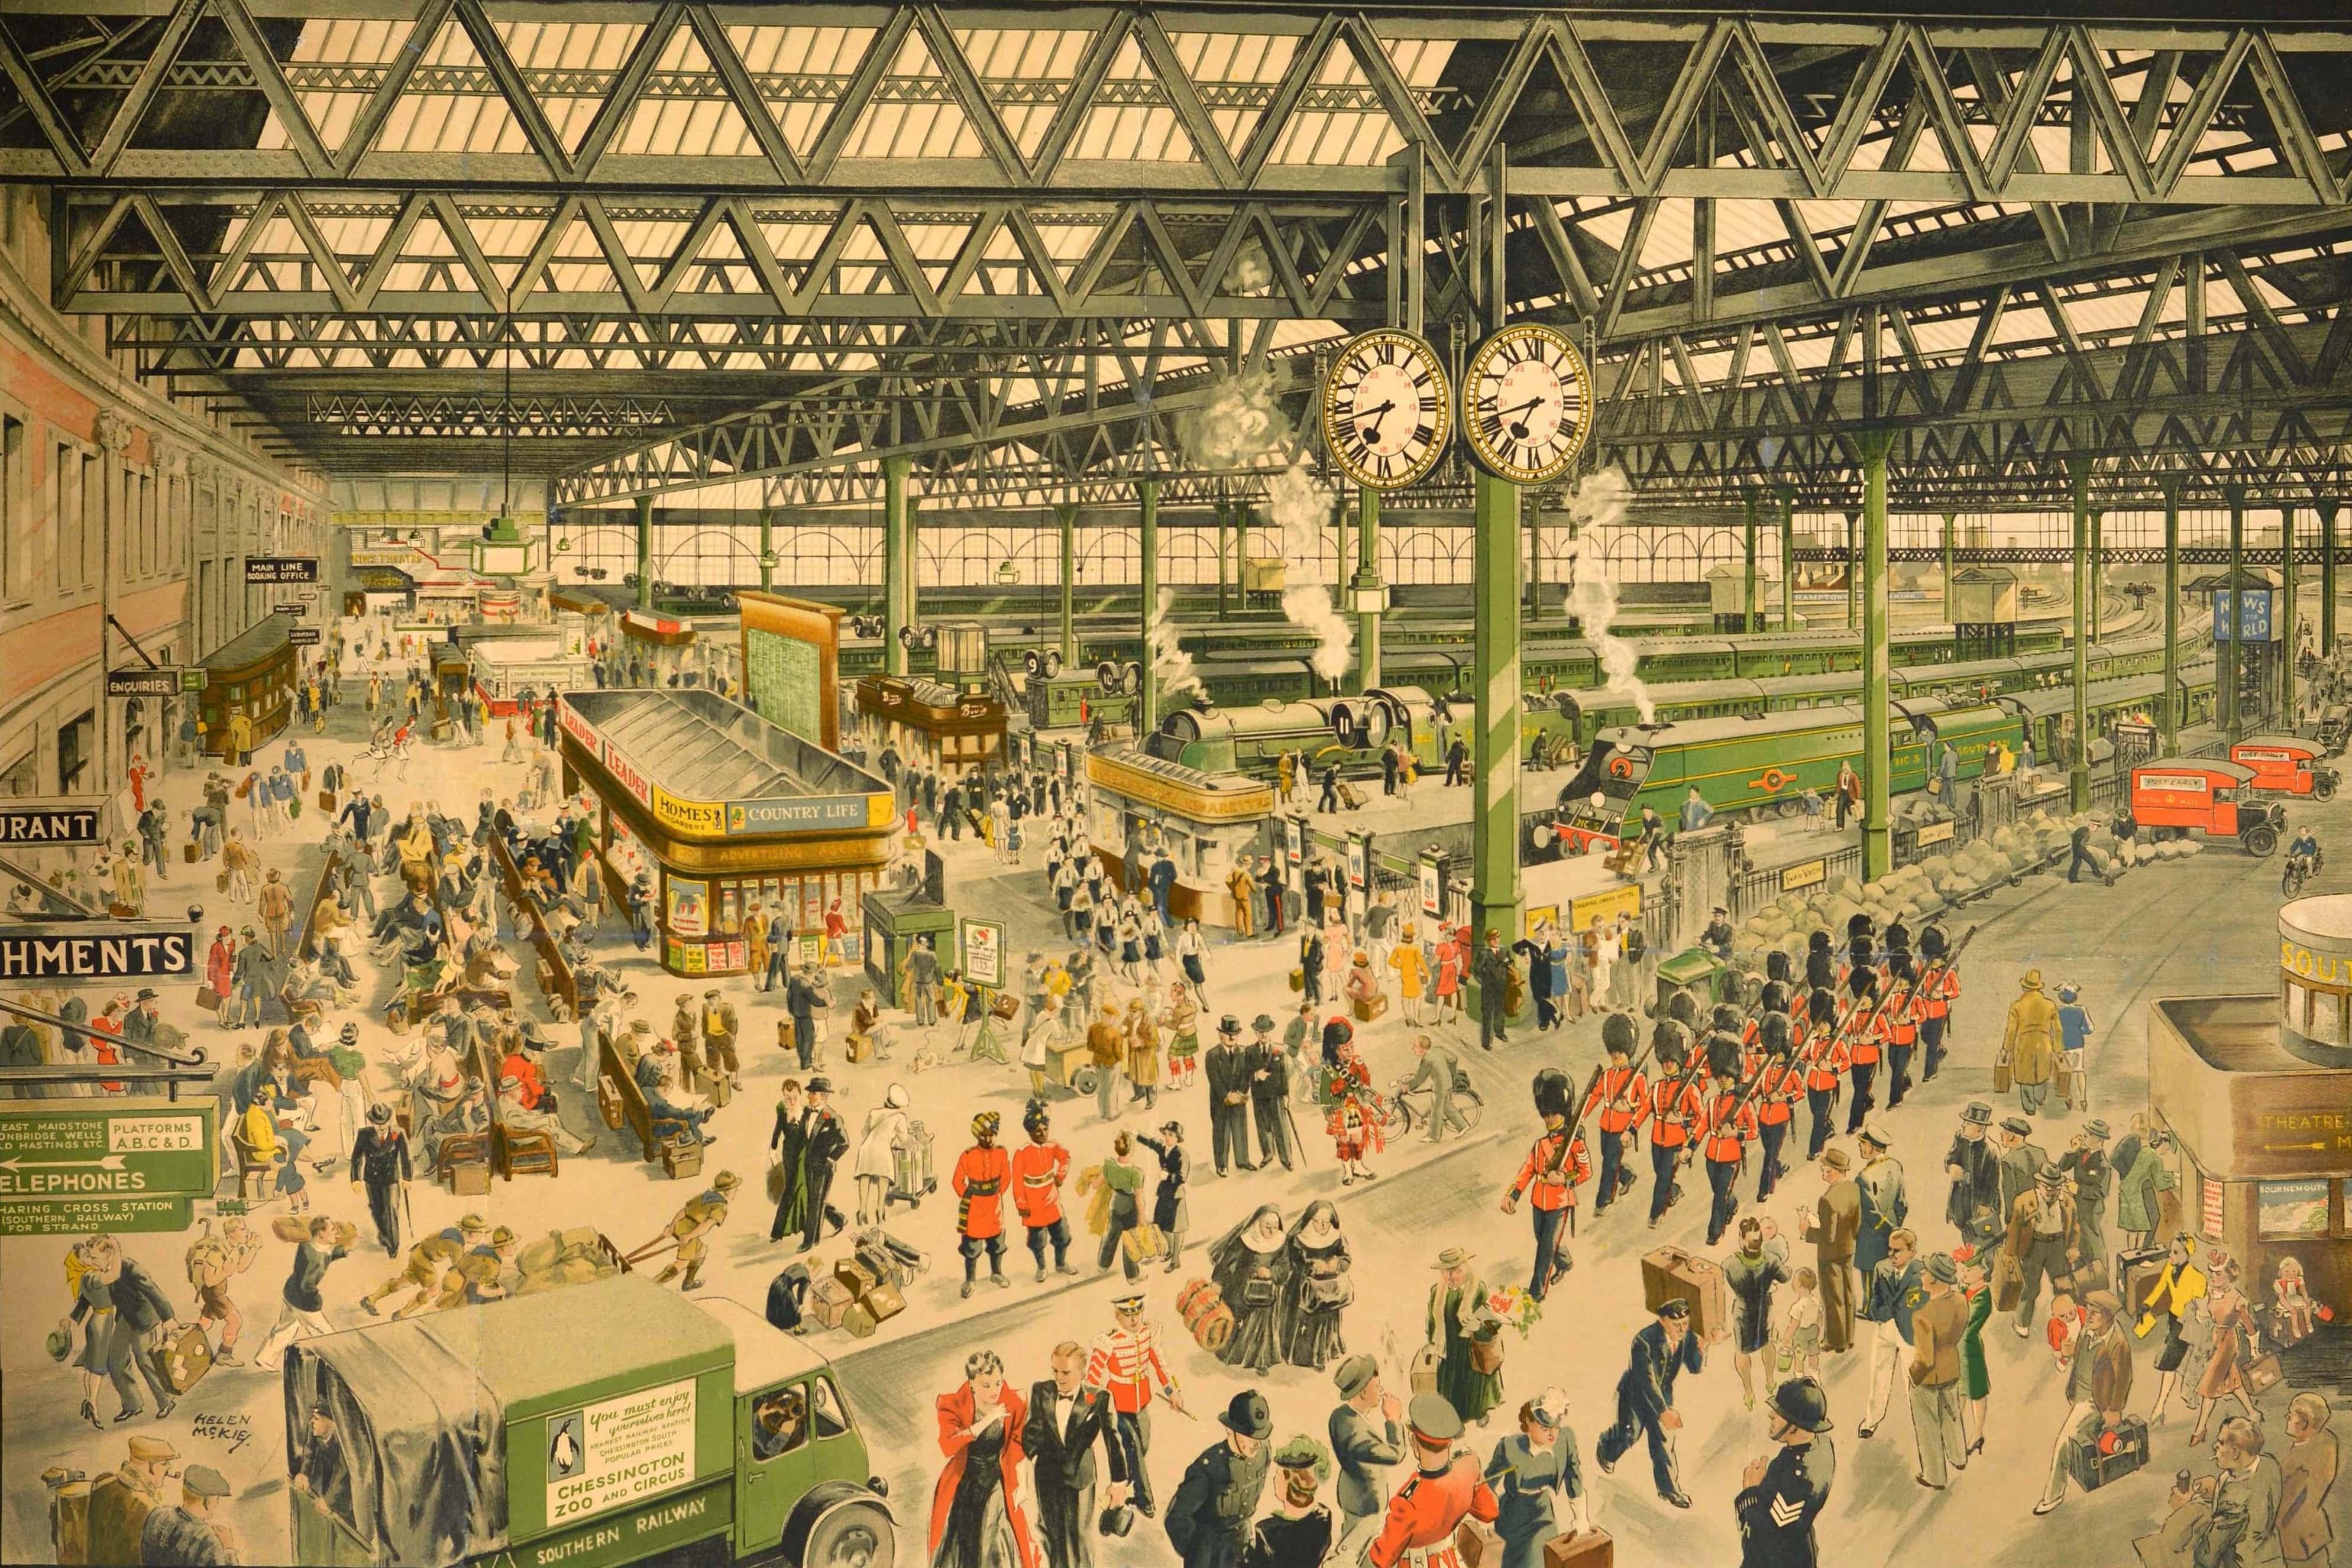 Original Vintage Travel Advertising Poster Waterloo Station Southern Railway  - Print by Unknown